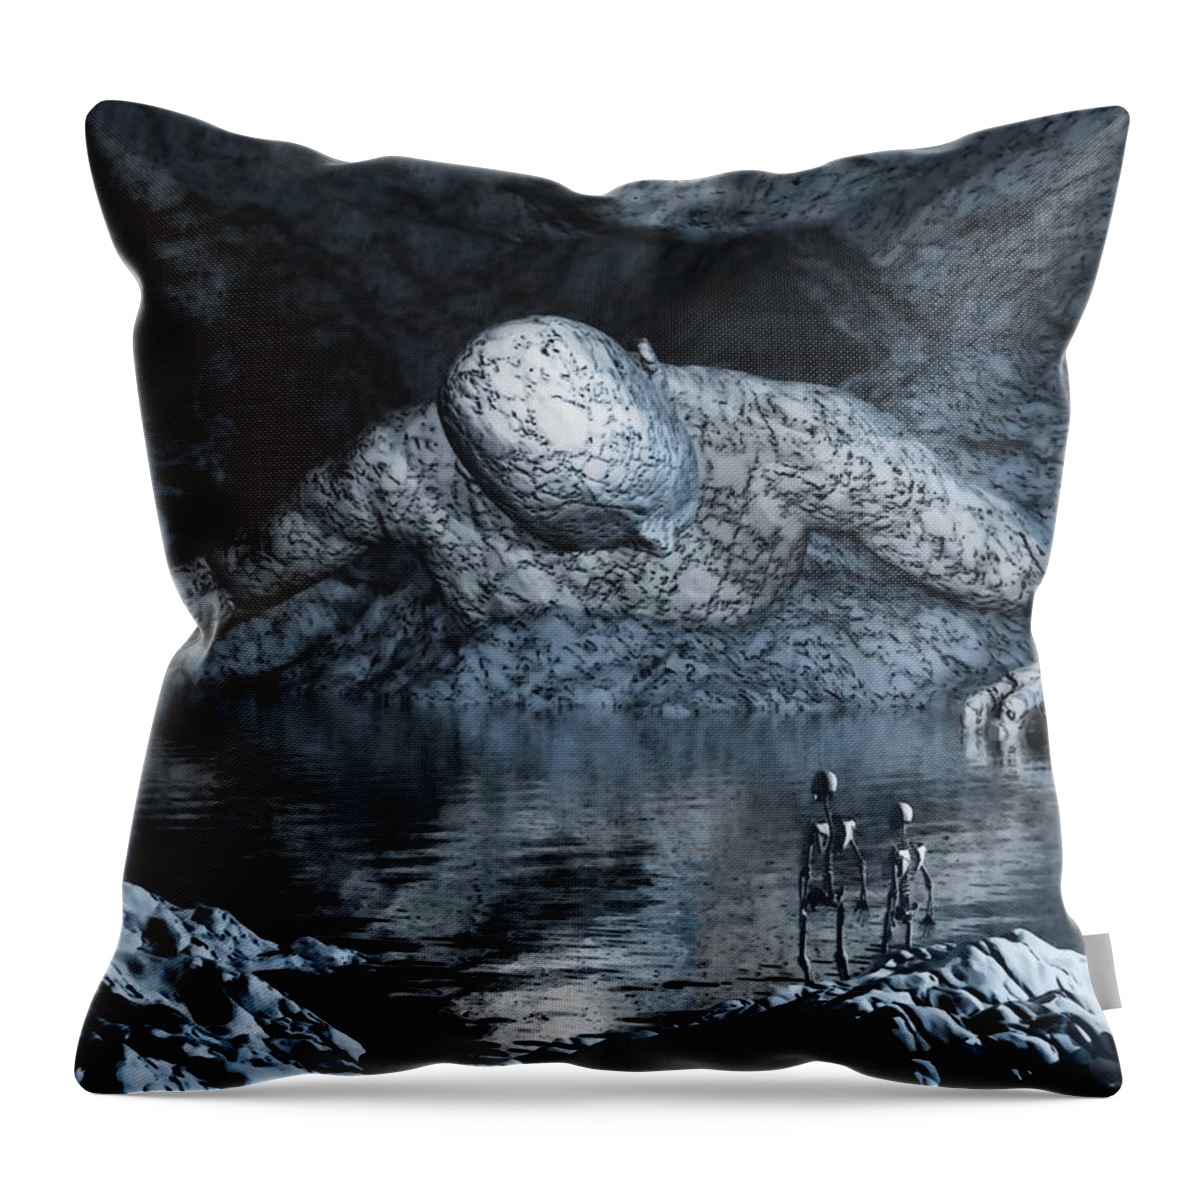 Lost Throw Pillow featuring the digital art The Lost Titan in the Realm of Perdition by John Alexander